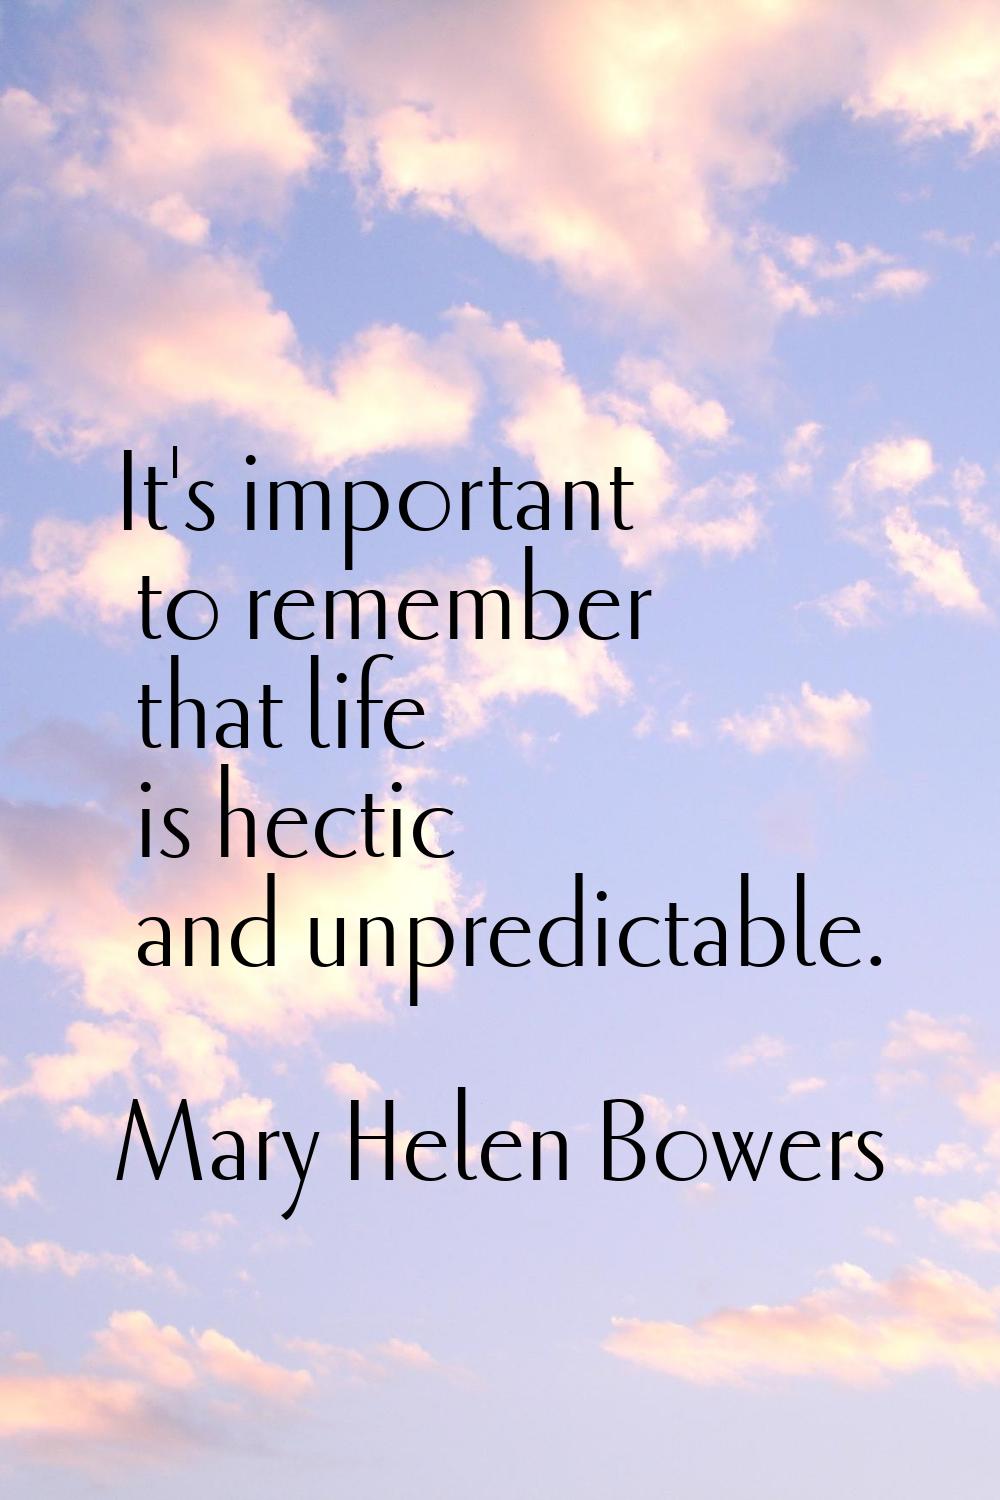 It's important to remember that life is hectic and unpredictable.